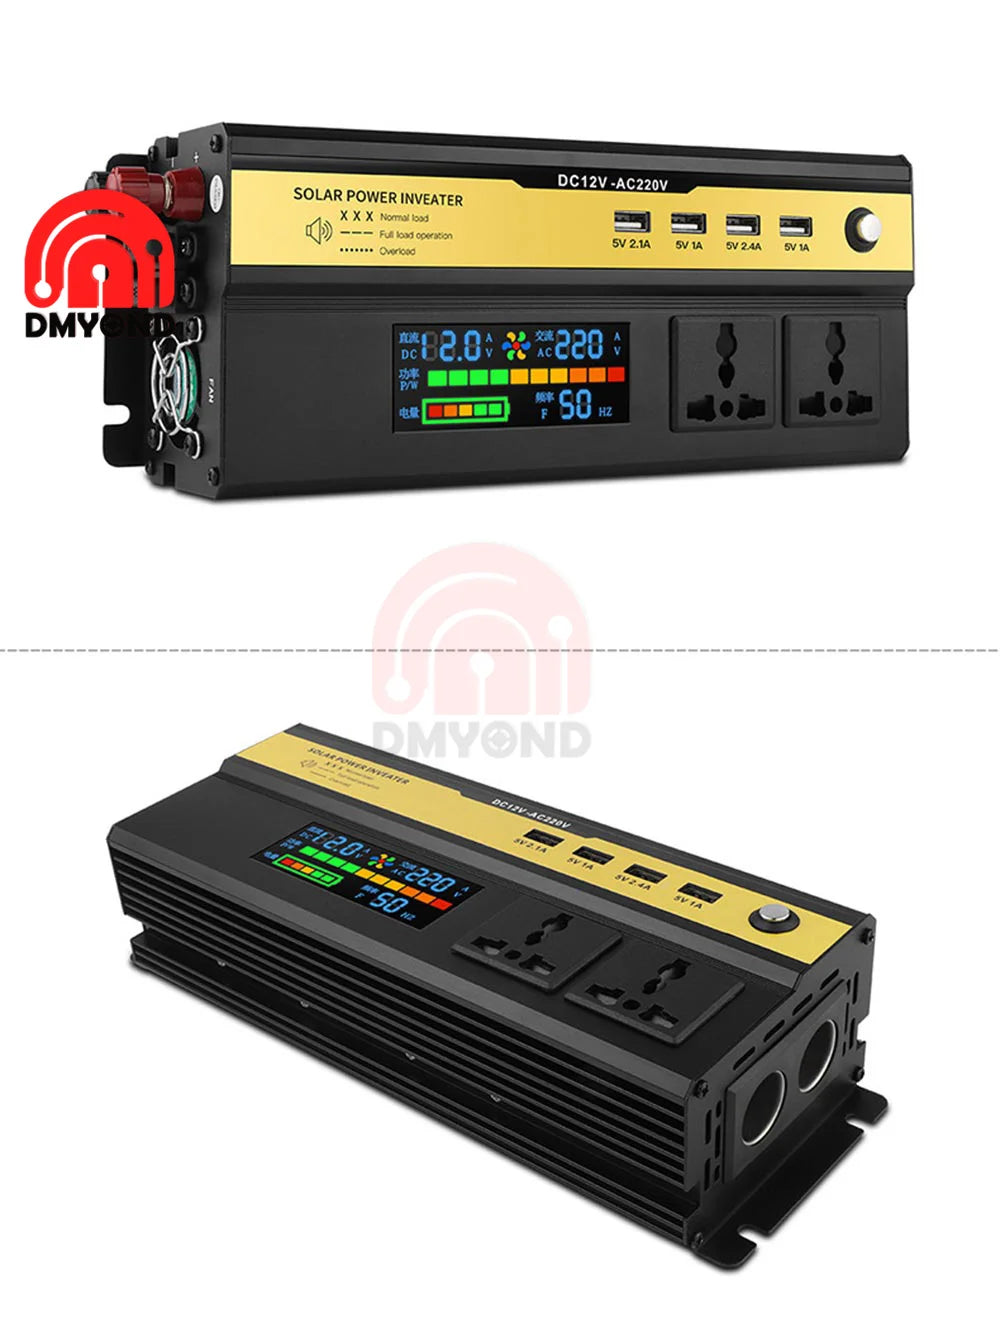 Inverter, Portable power bank converter with modified sine wave, DC input 12V, AC output 220V, and various power options.